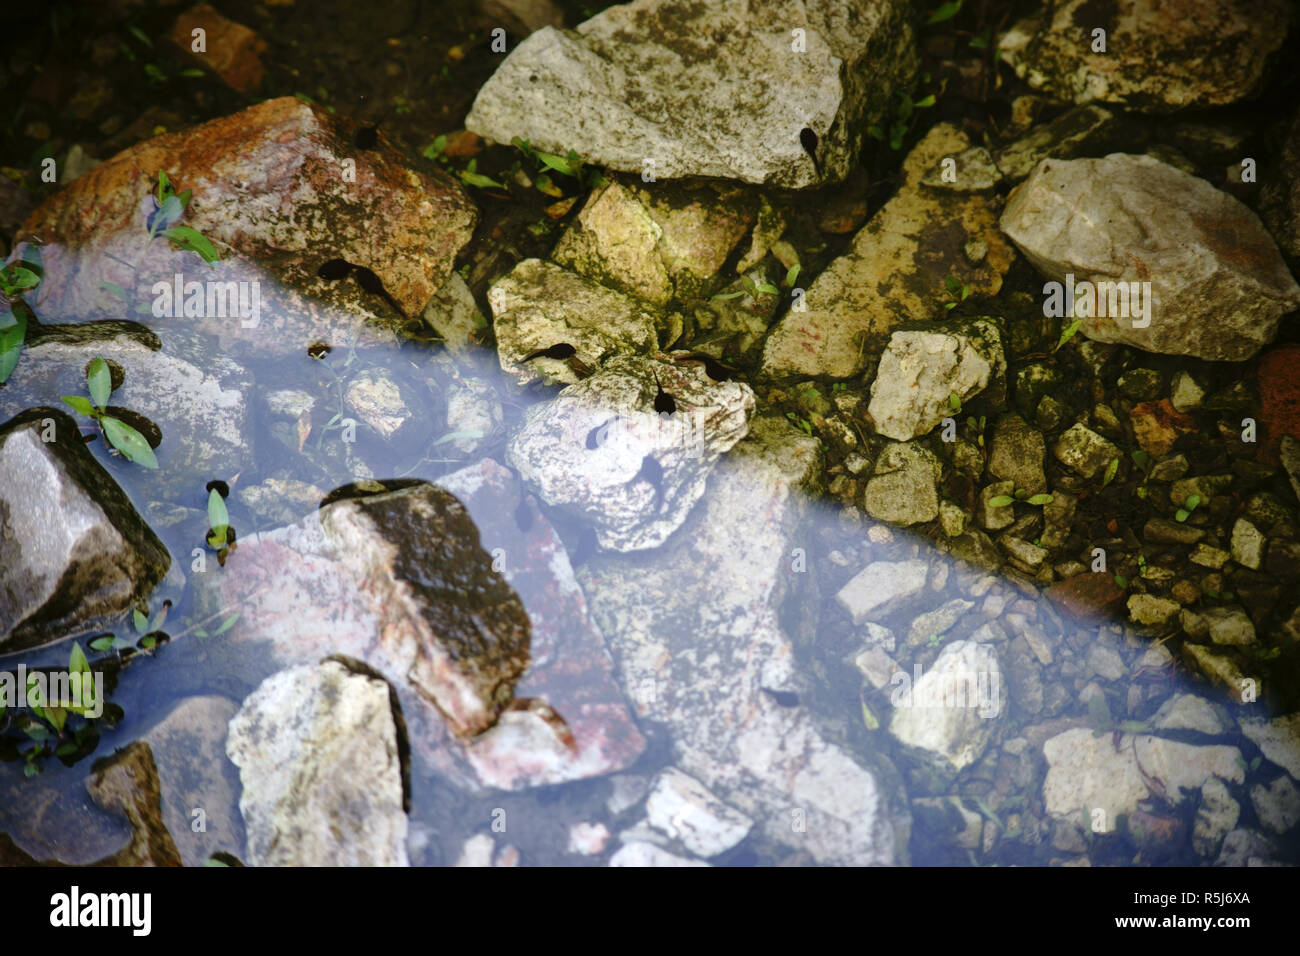 tadpoles in shallow water Stock Photo